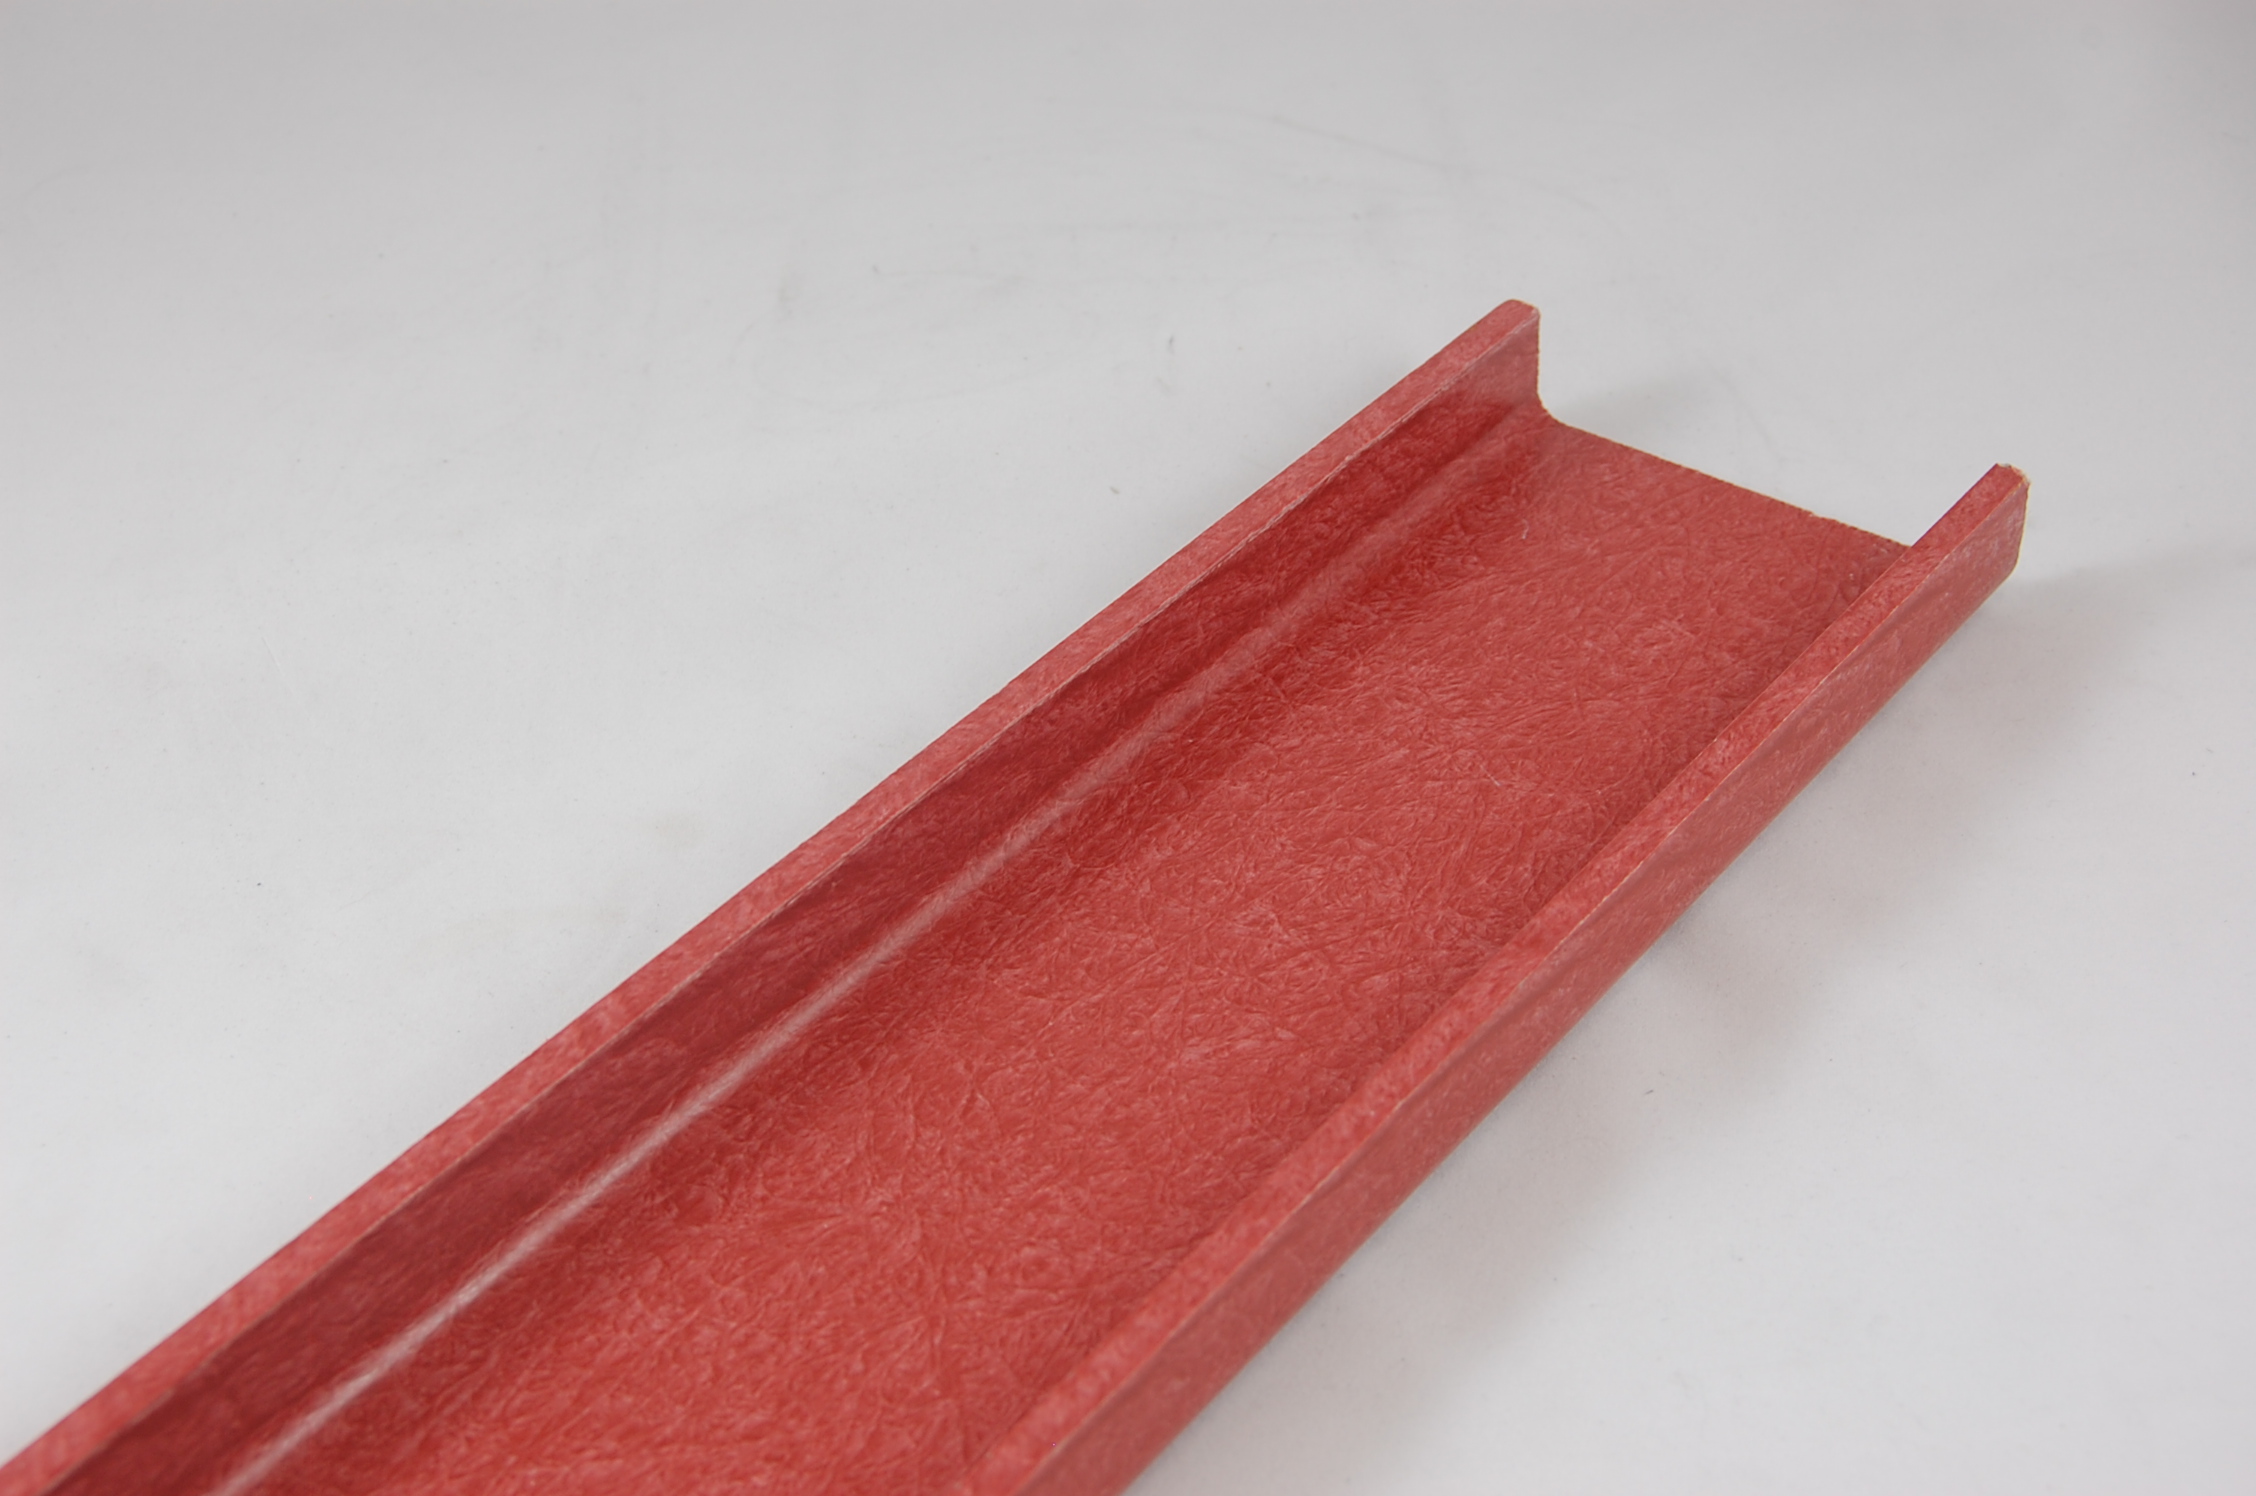 4-9/16"W x 2-9/16" Leg x 9/32" thick GLASROD® Grade 1130 Fiberglass-Reinforced Polyester Laminate Channel, red,  120"L channel